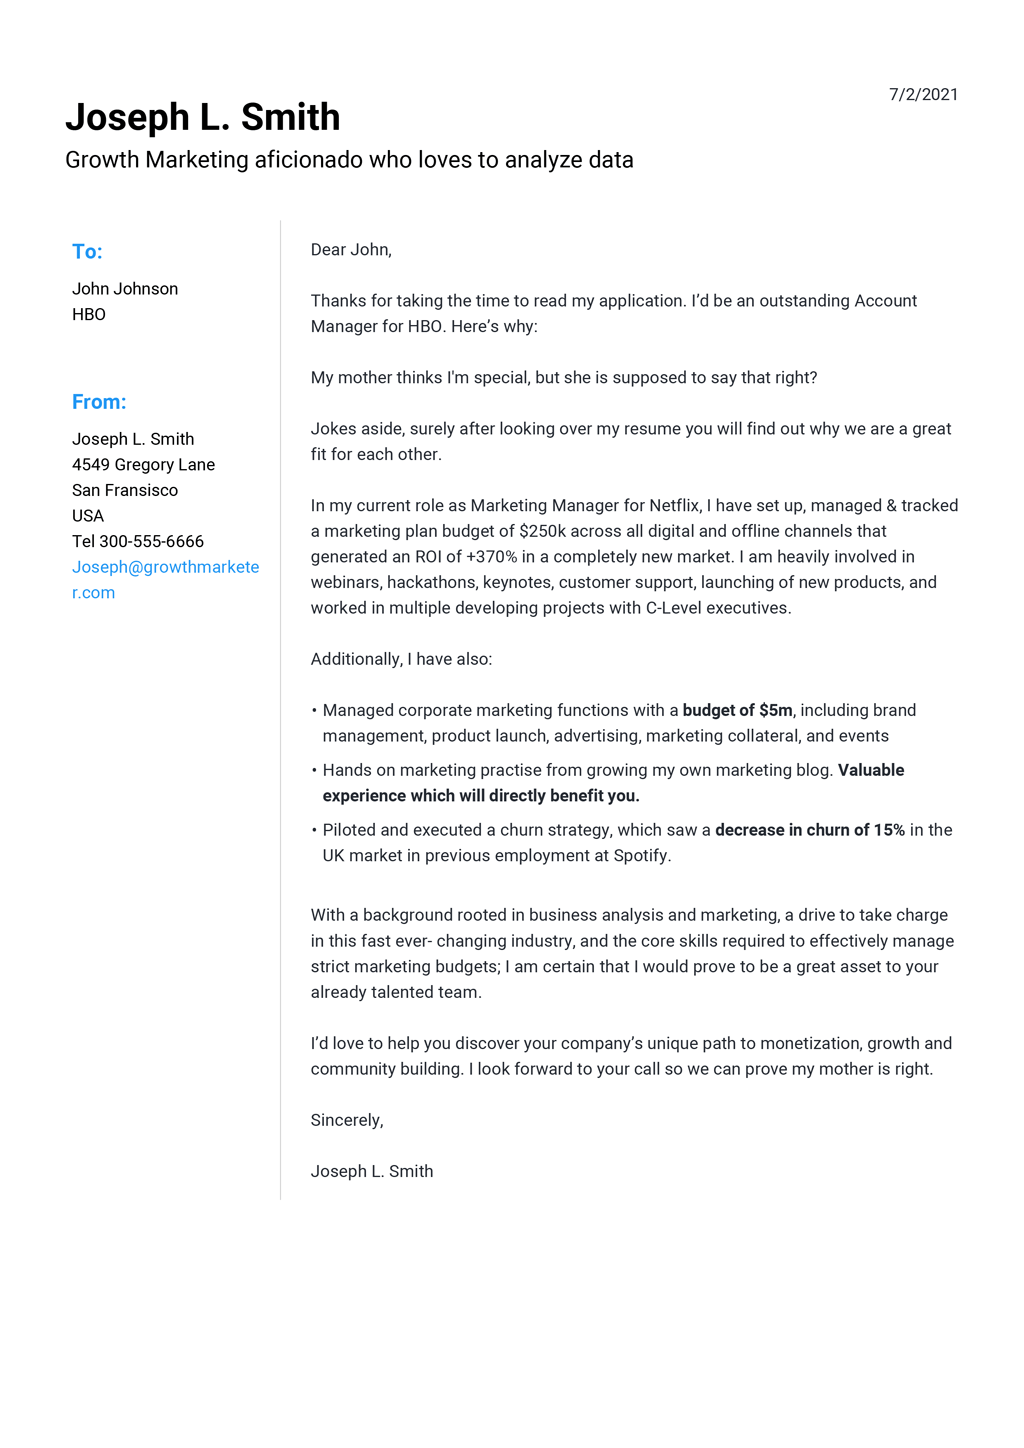 Eye Catching Cover Letter Examples from jofibo.com